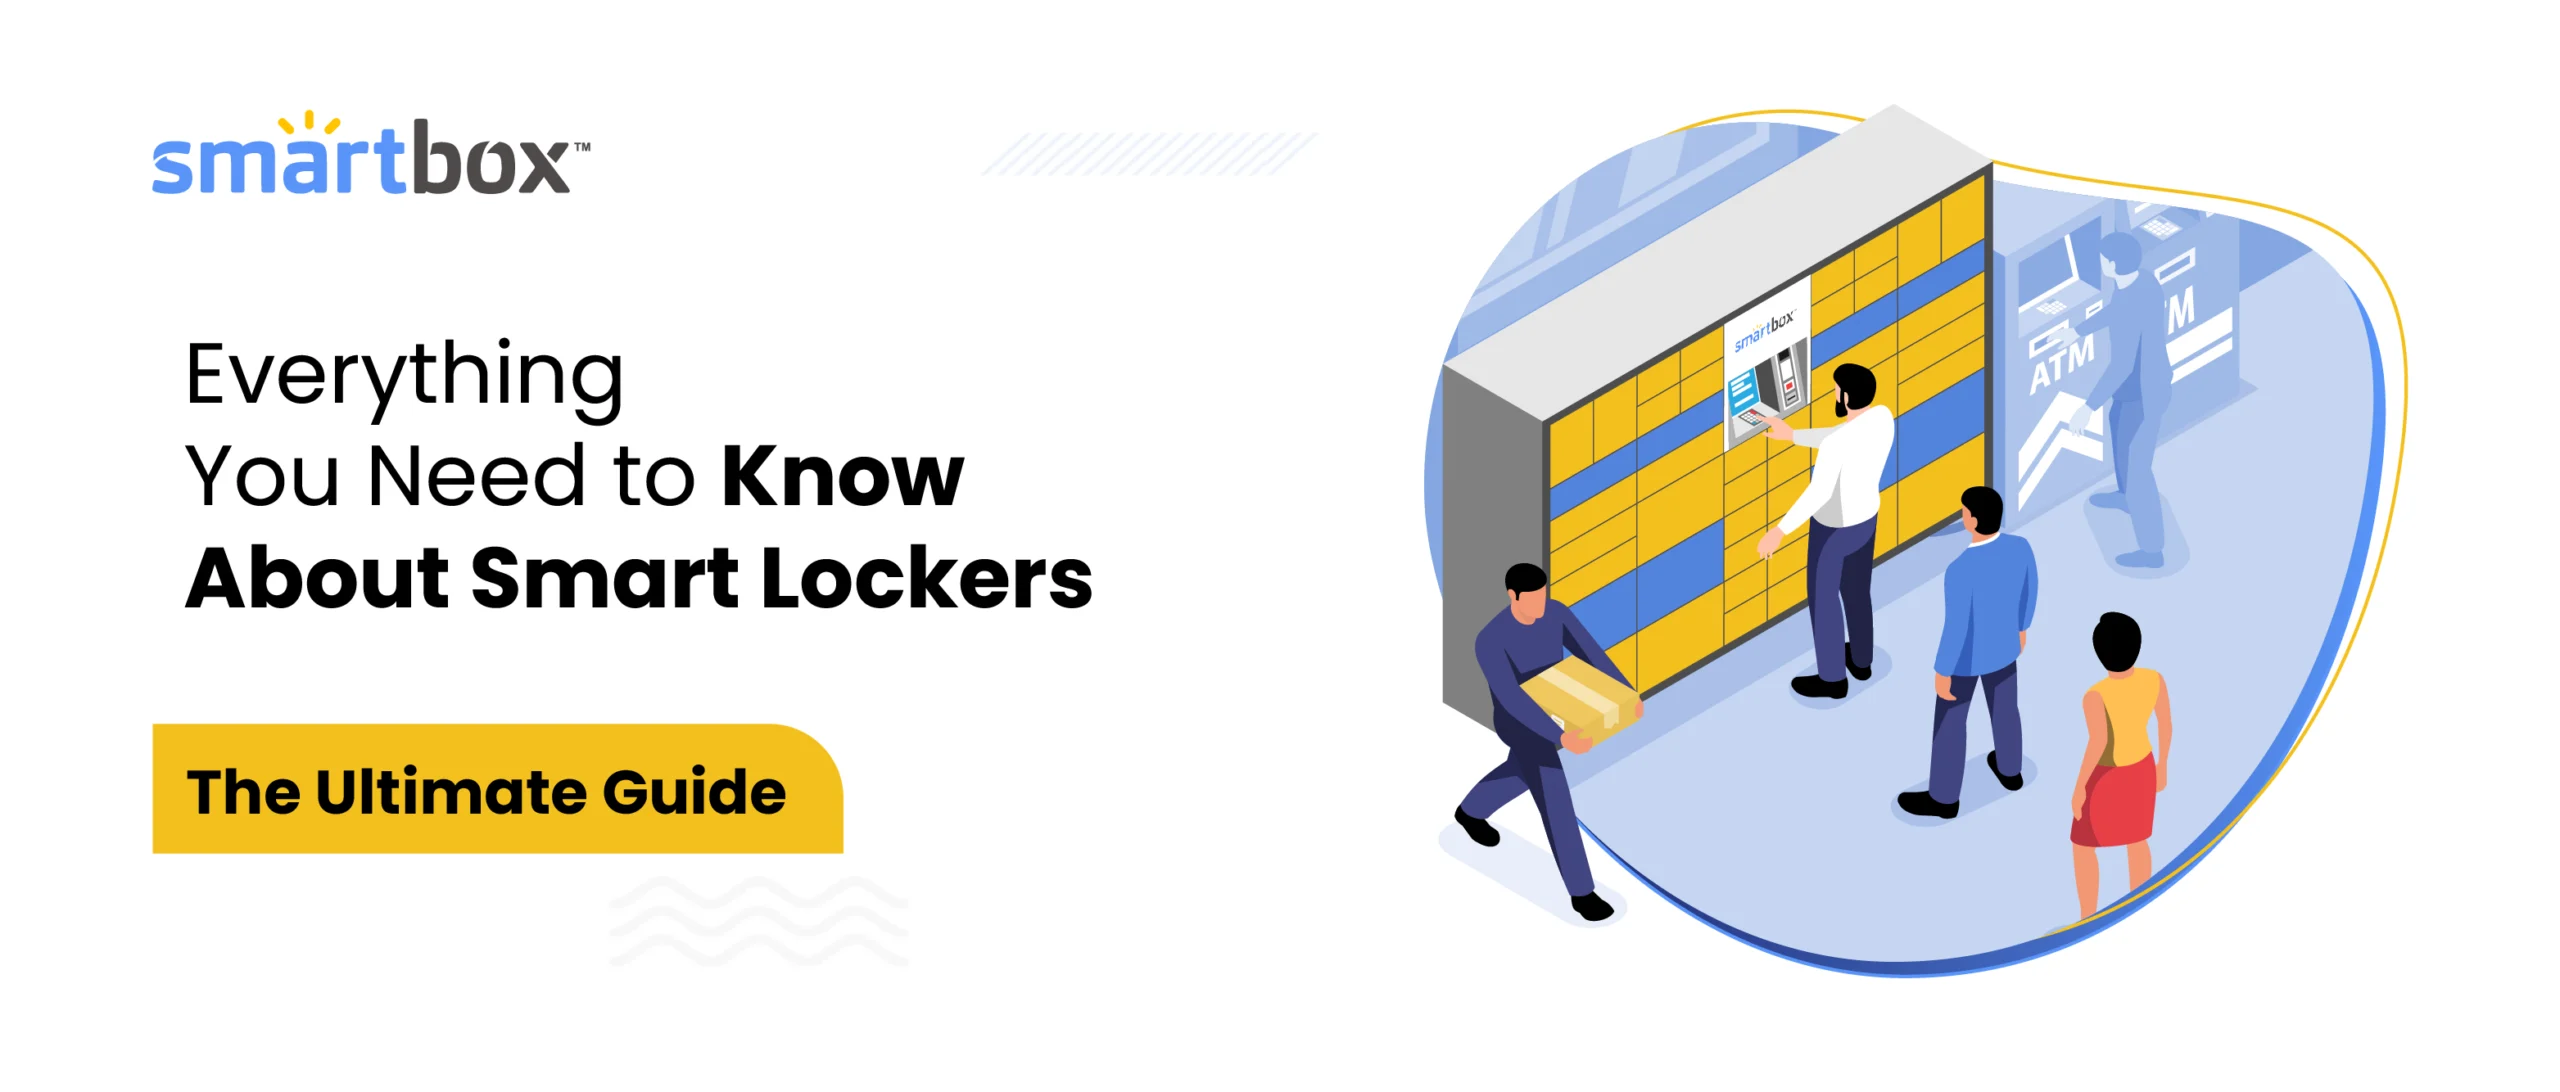 Illustration of people using smart locker system to collect their package in an organic shape with text on one side ‘Everything You Need to Know About Smart Lockers: The Ultimate Guide’